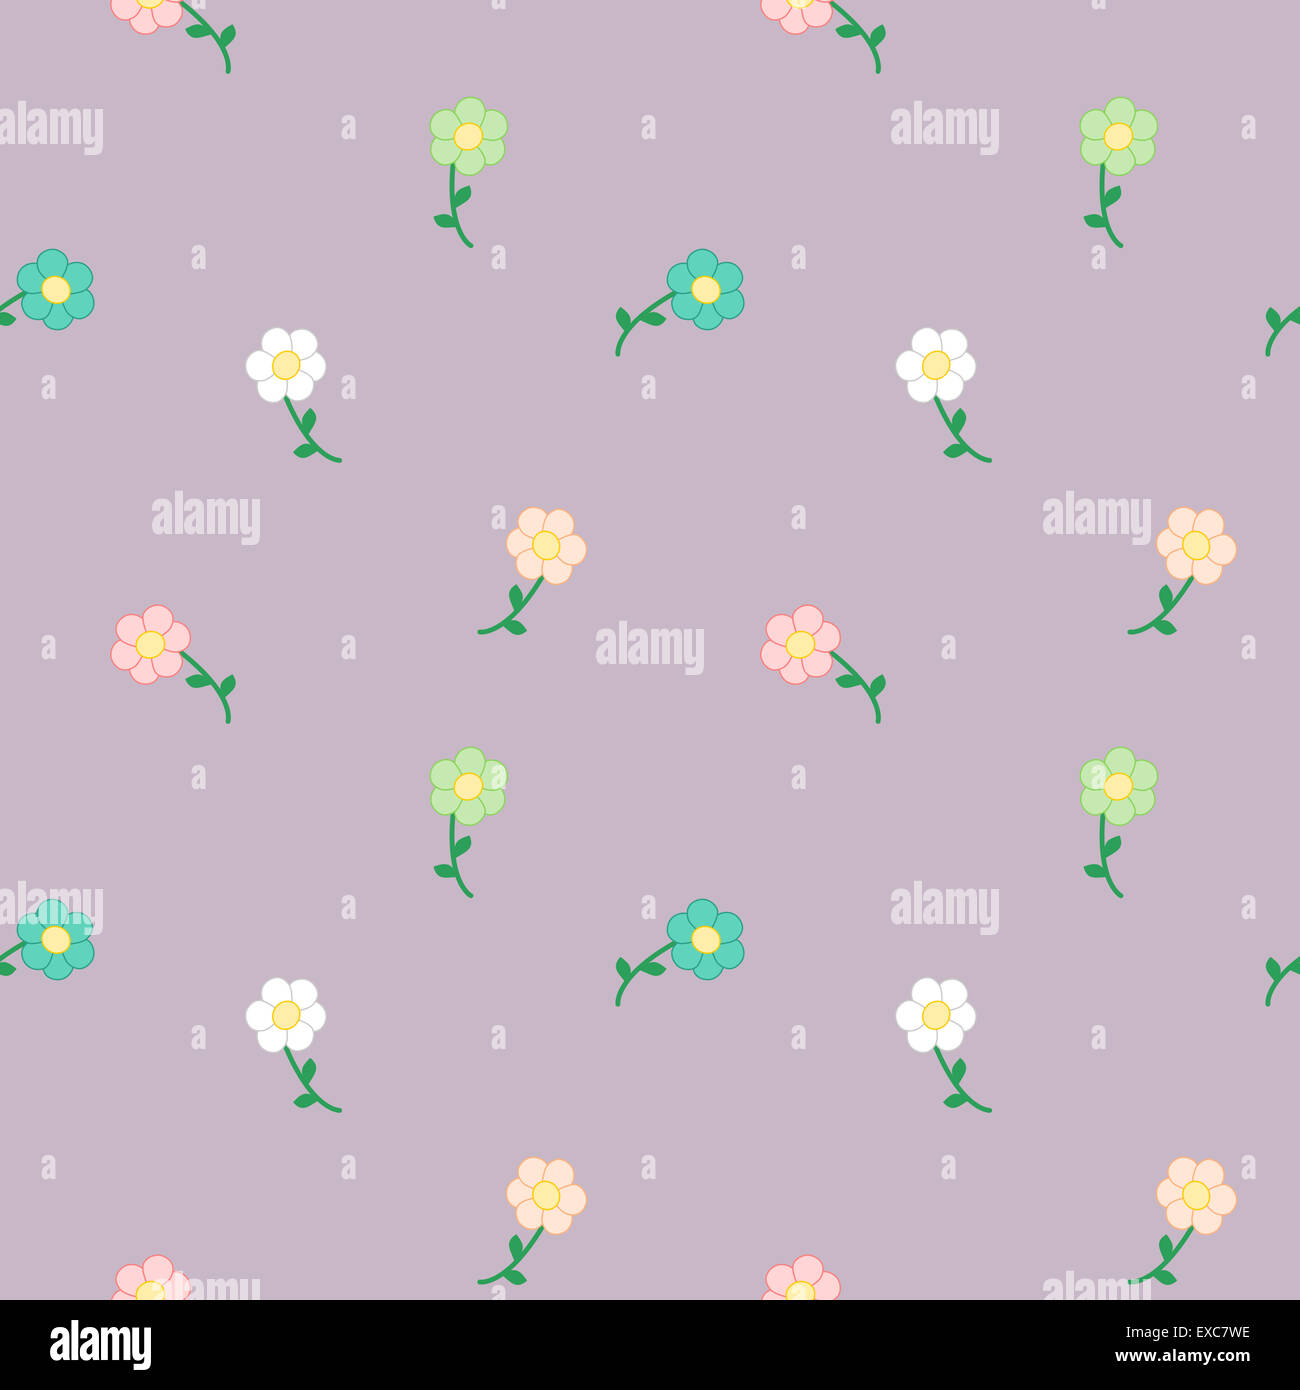 Groovy Retro Daisy Flowers Background Groovy Flowers Seamless Pattern  Stock Vector  Illustration of card pastel 247033609